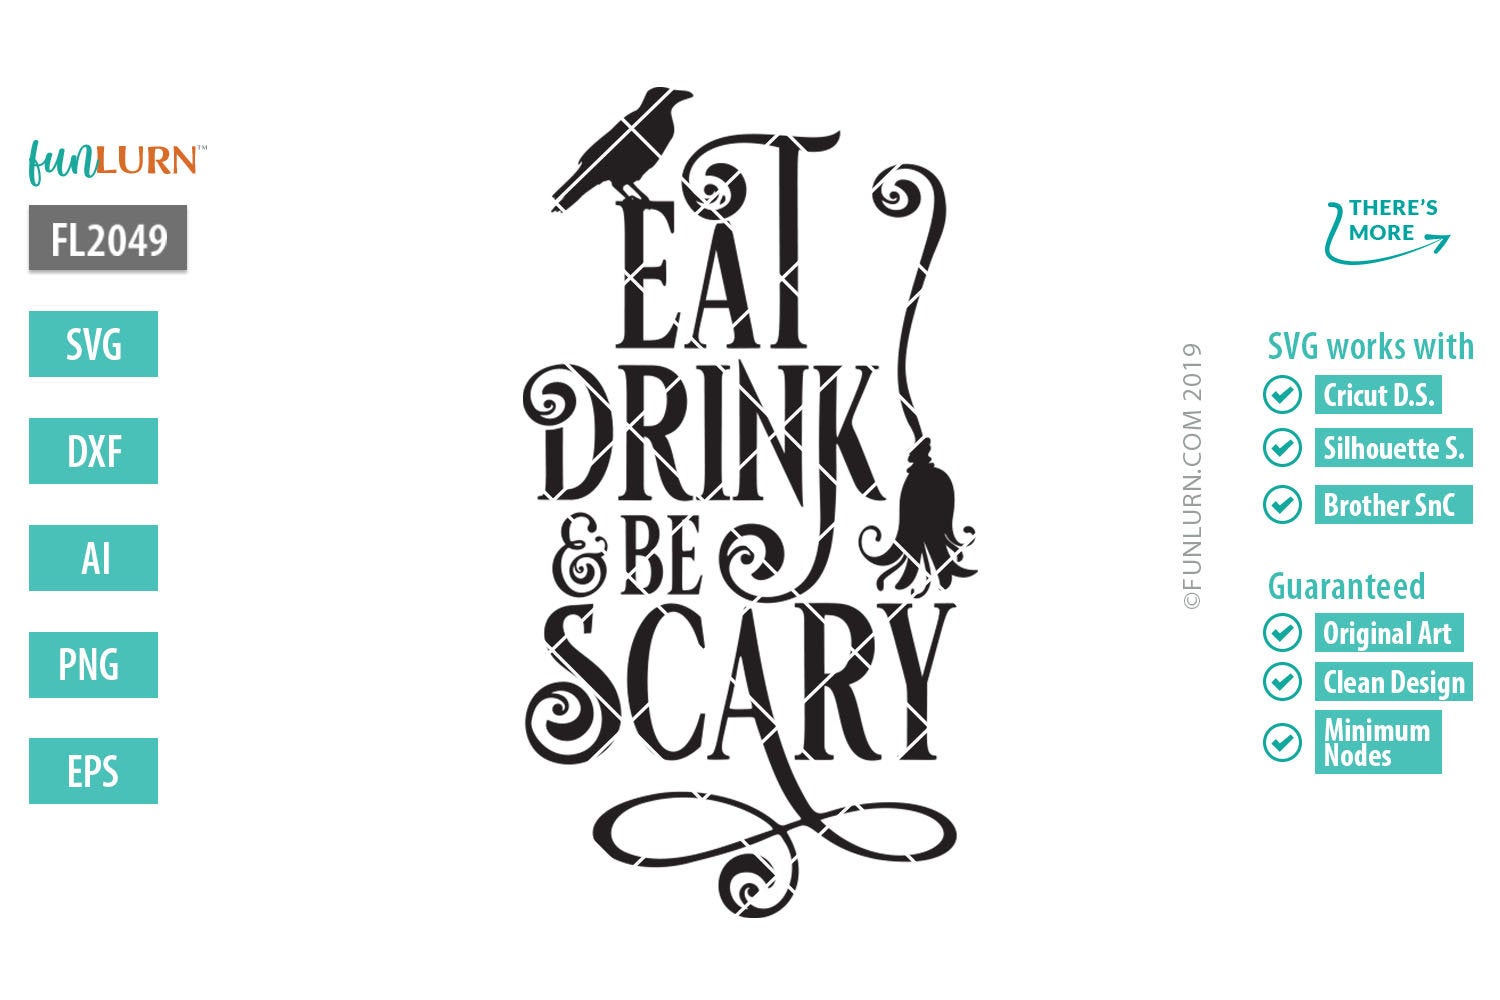 Eat, Drink, and Be Scary Bundle